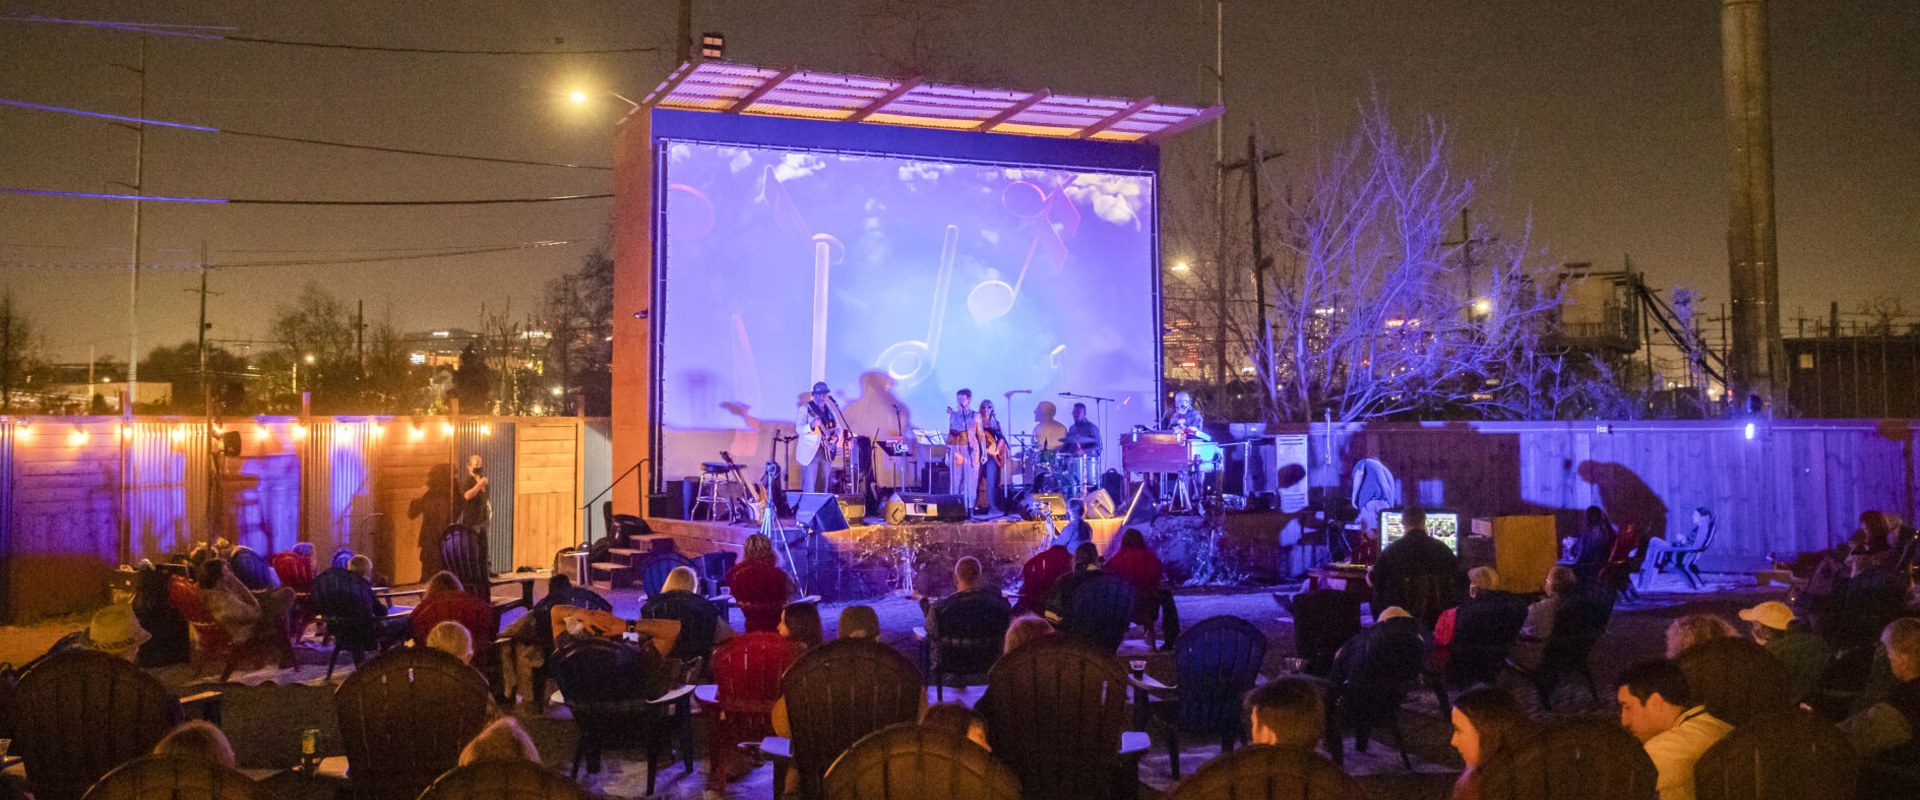 The Best Outdoor Theater Venues in New Orleans